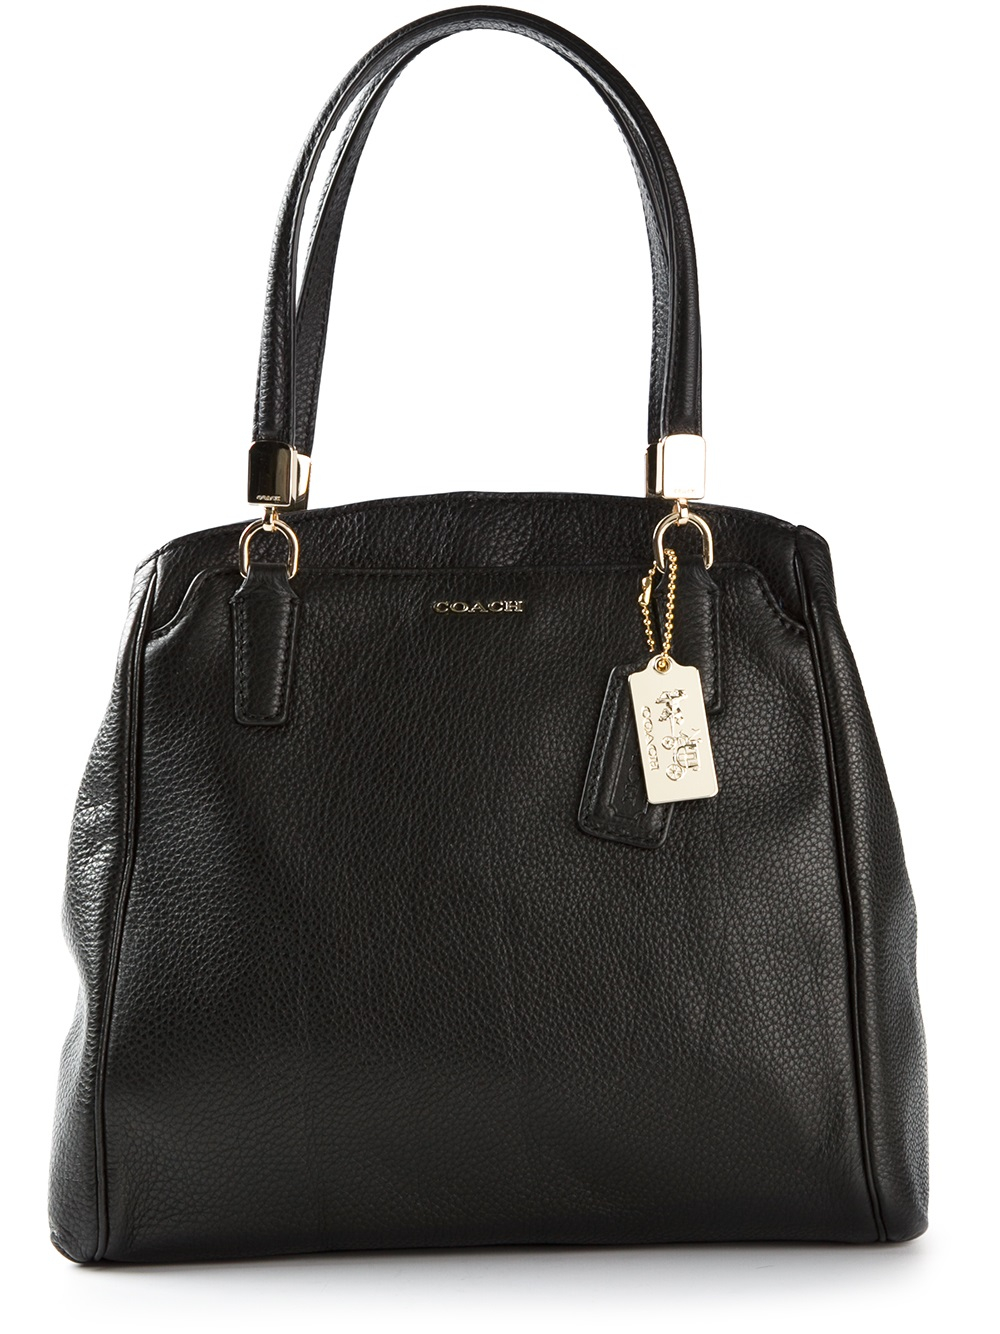 COACH Leather Textured Doctors Bag in Black - Lyst